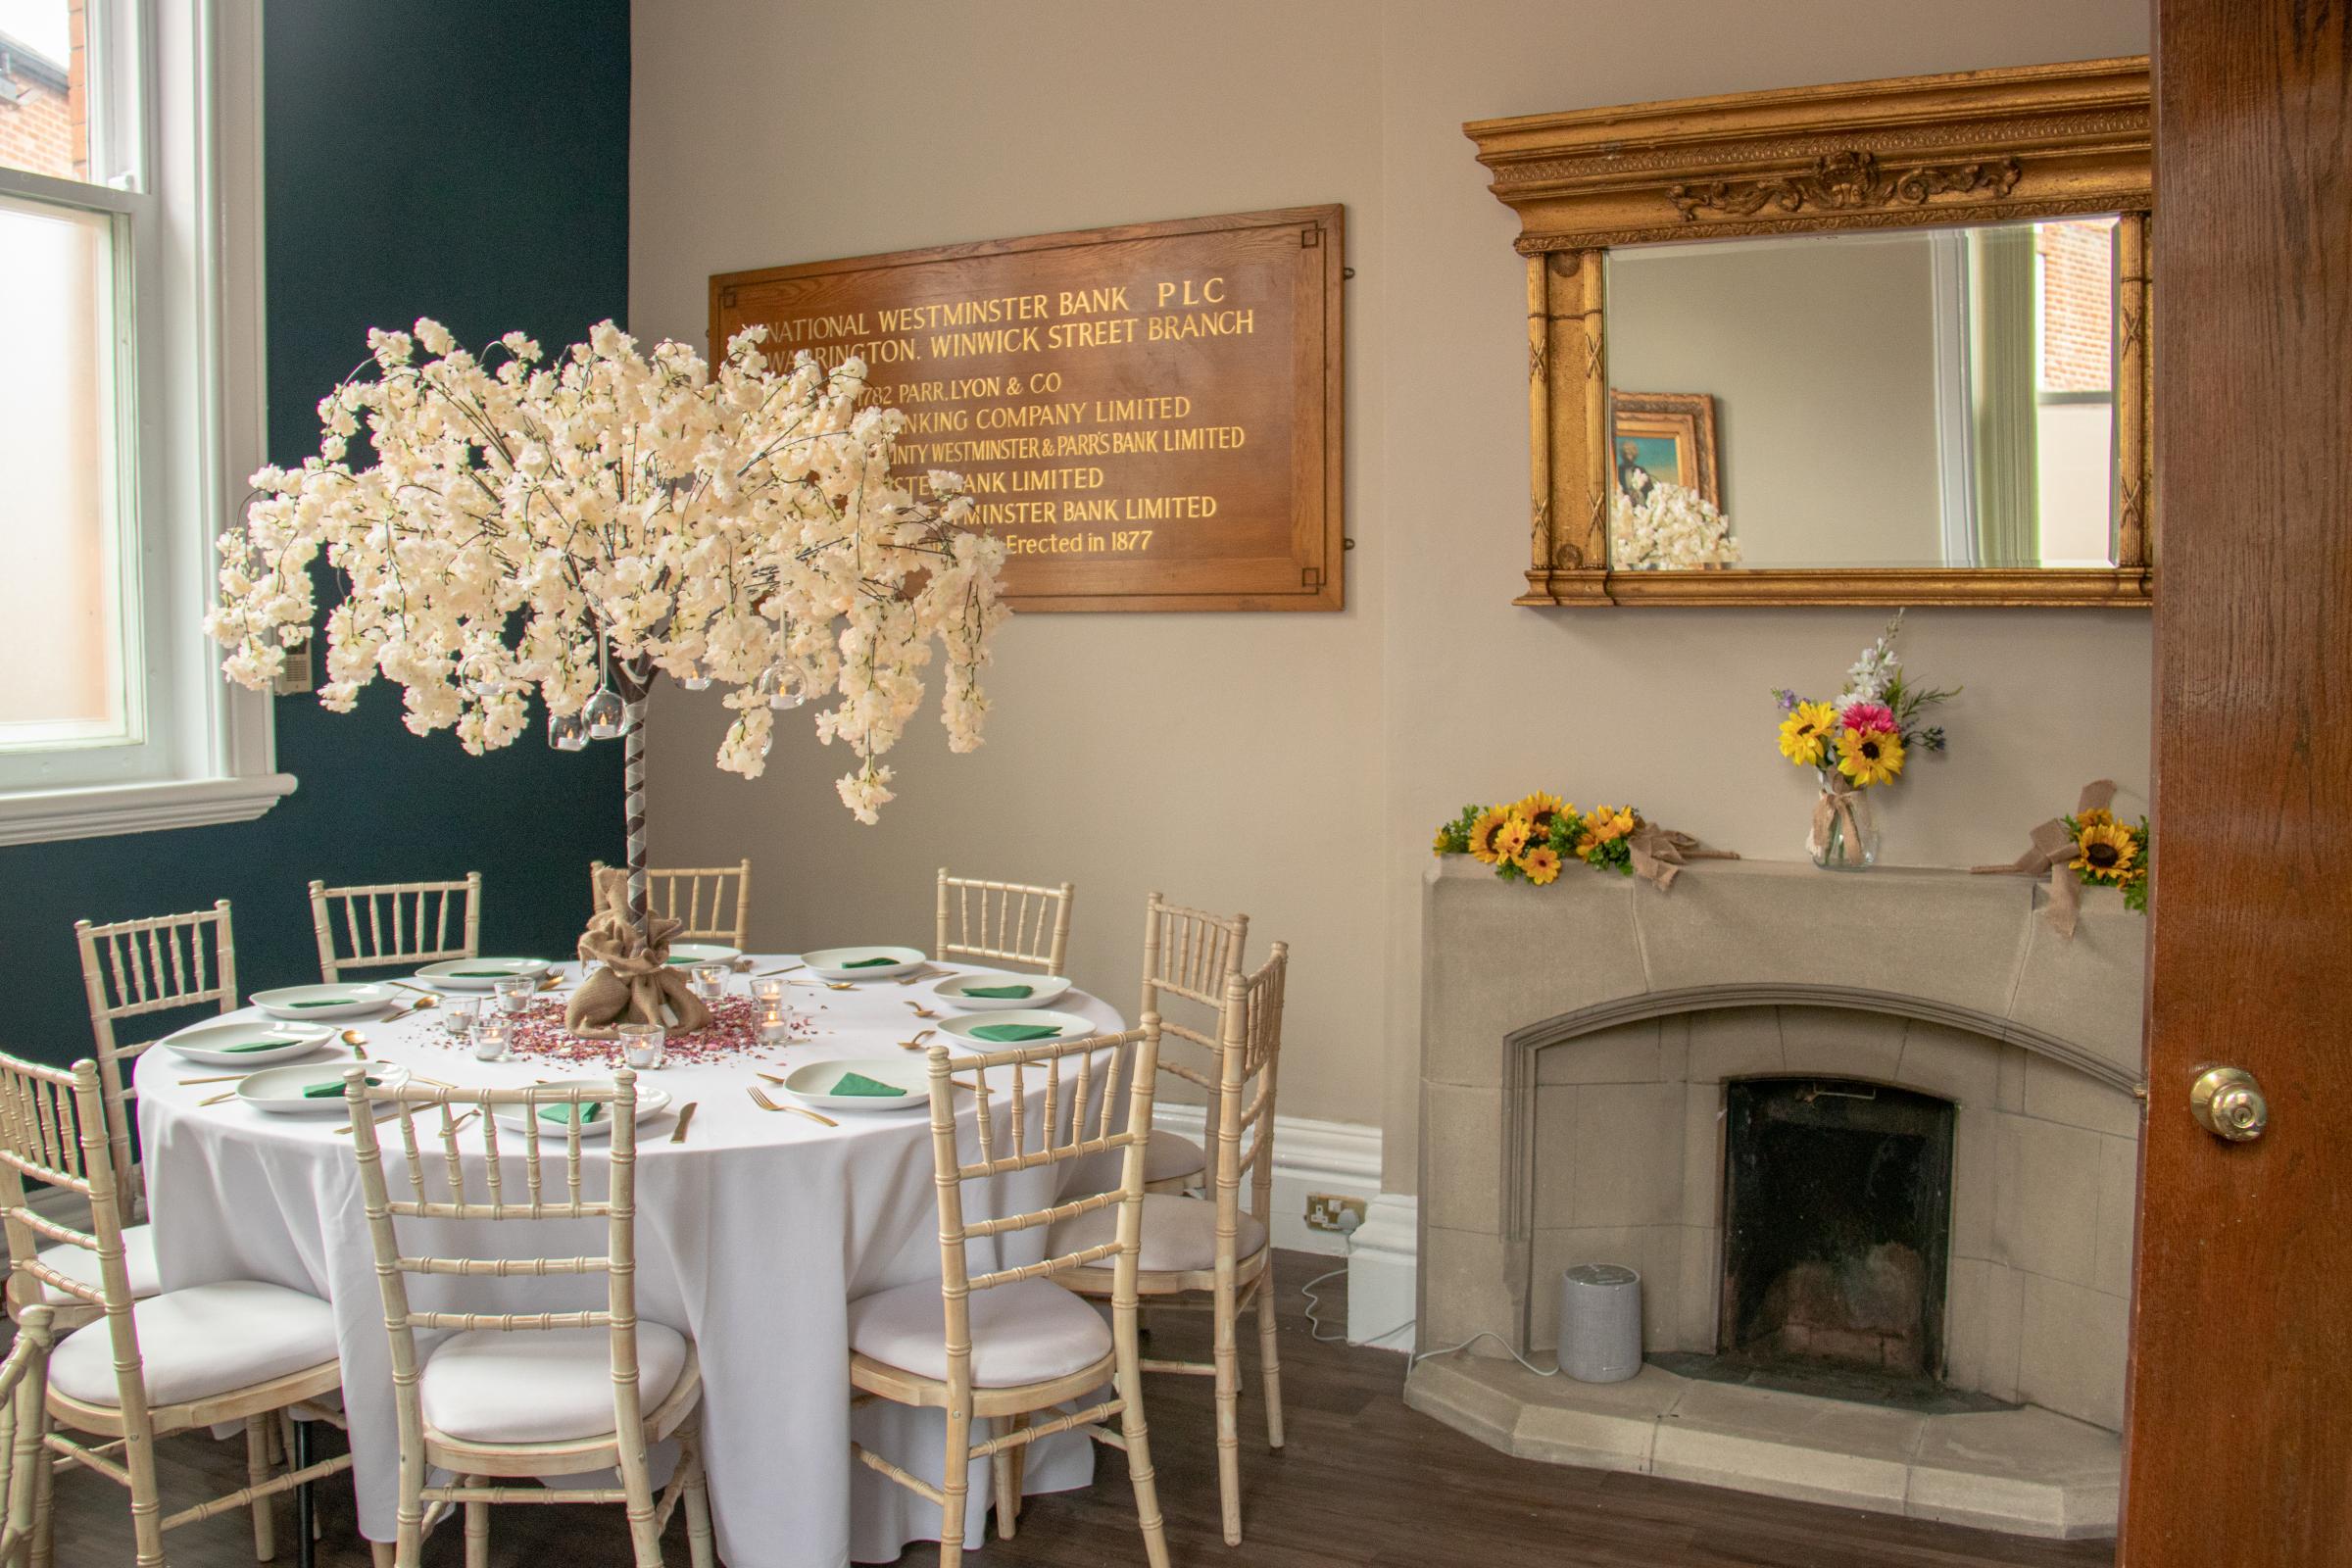 The Bank Managers Suite that can seat up to 30 guests for private dining